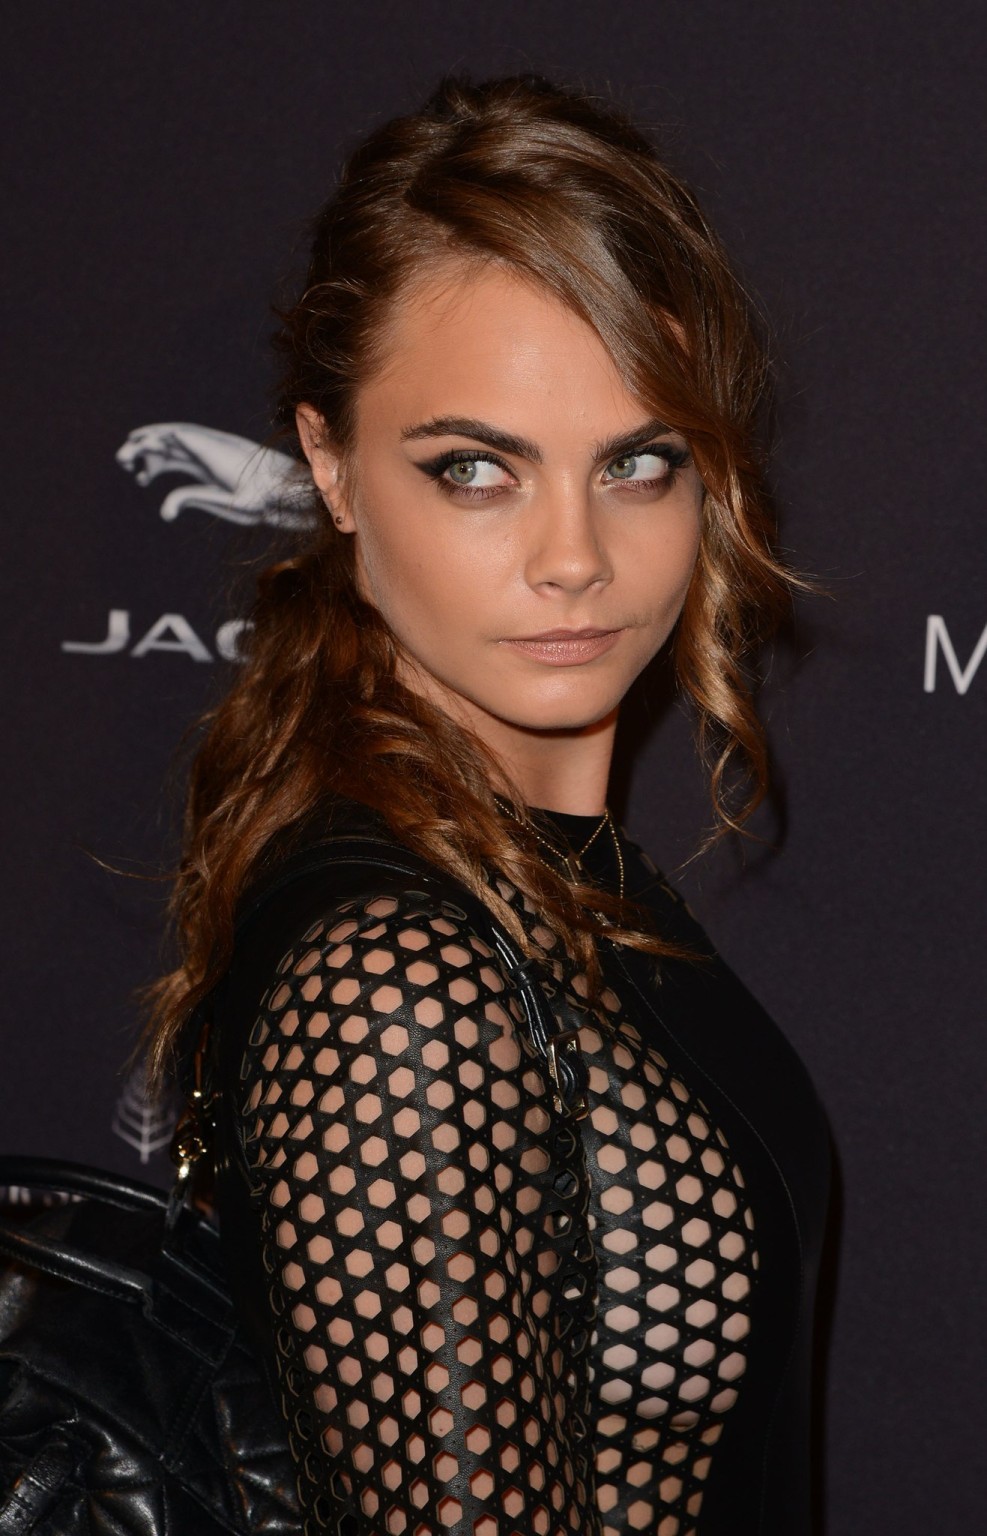 Cara Delevingne shows sideboobs wearing a partially see through leather dress at #75175785